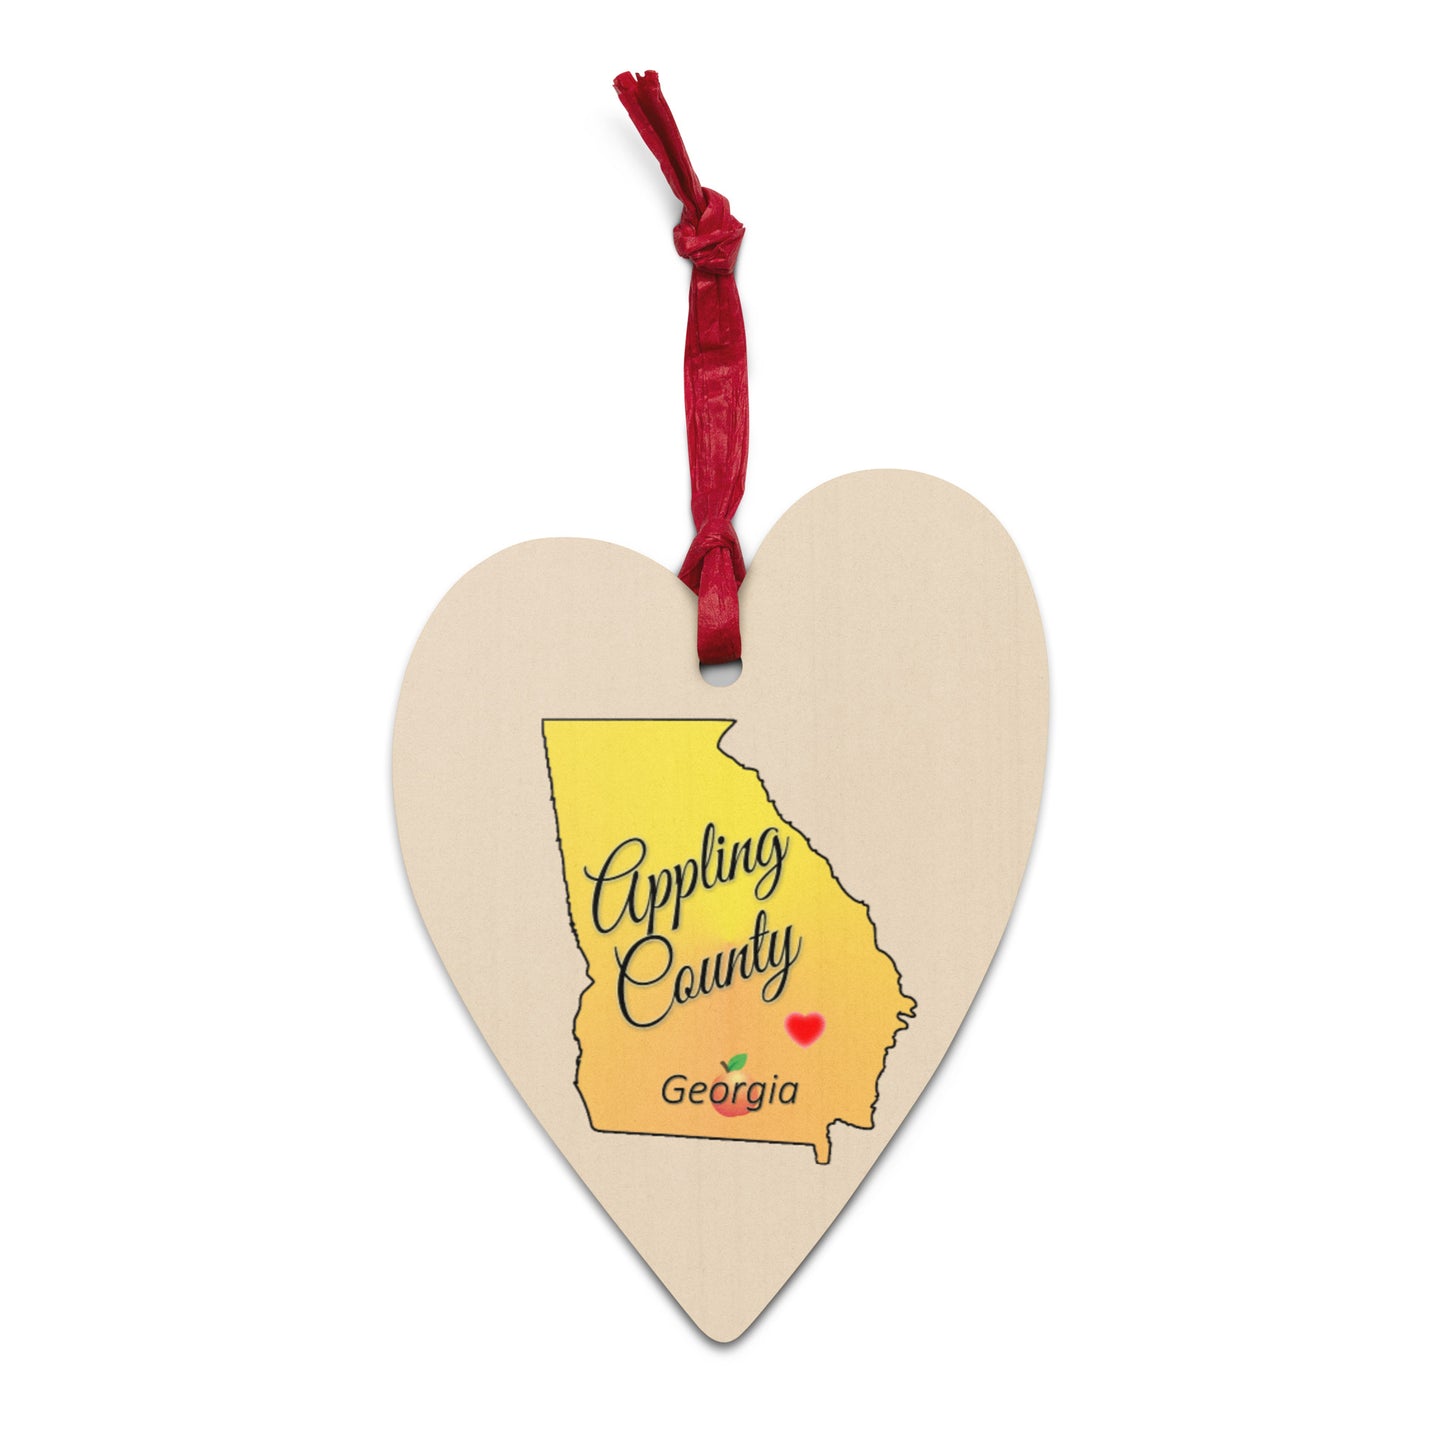 Appling County Georgia Heart Wooden ornaments